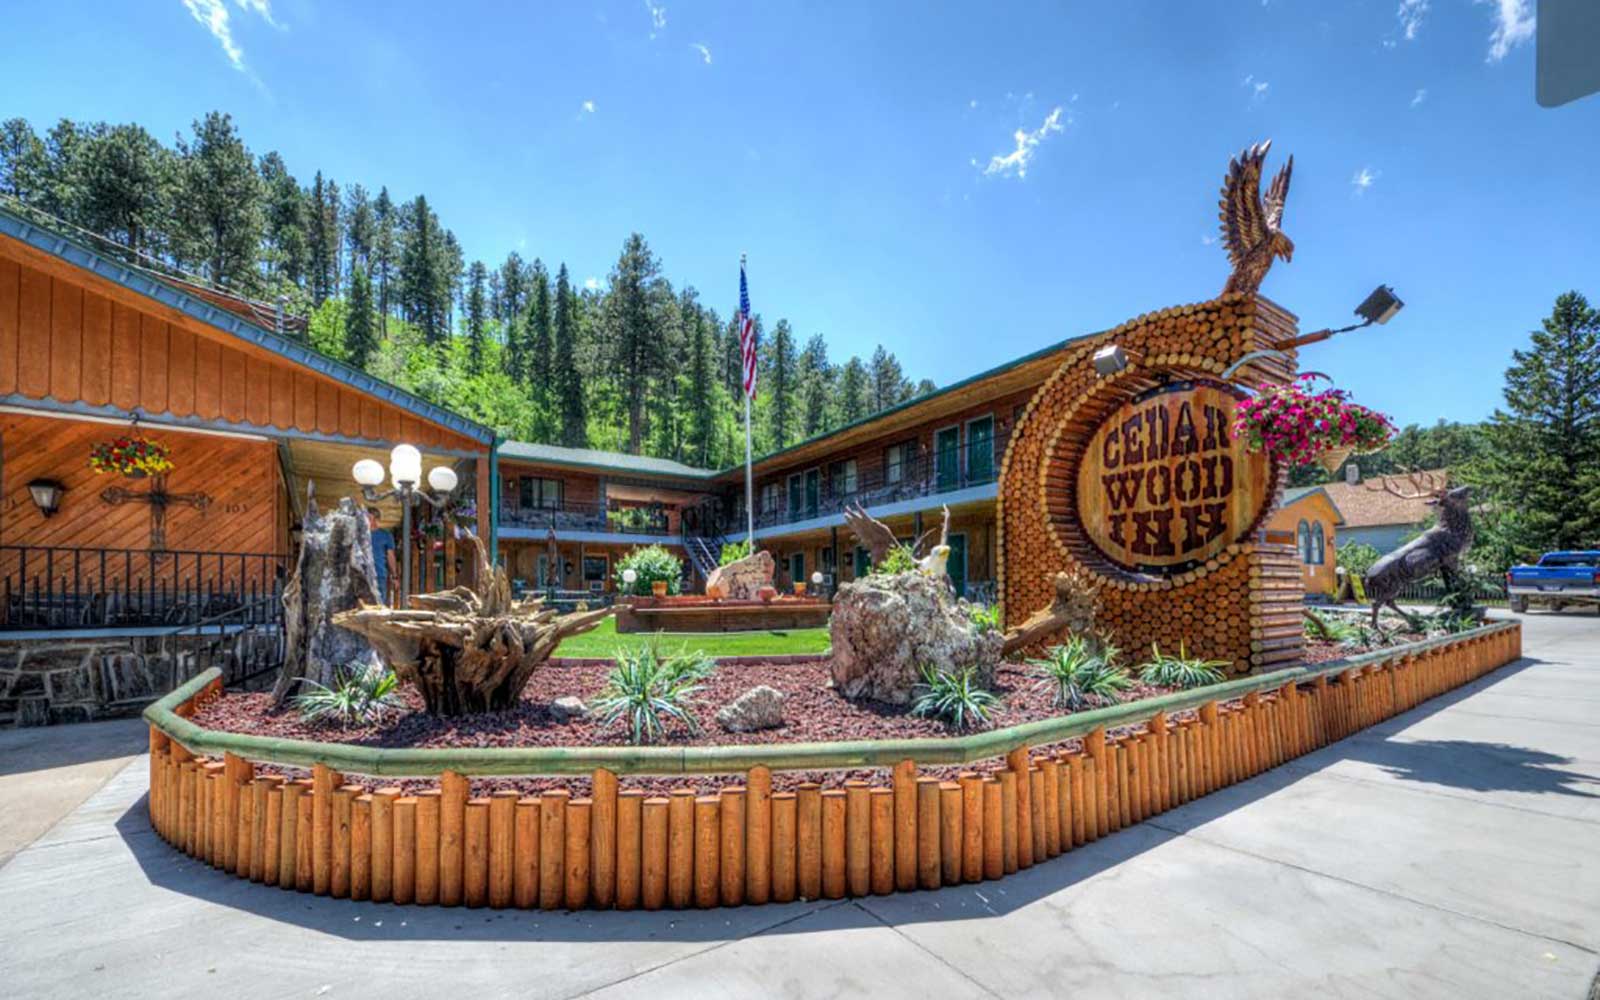 Exterior photo of a hotel in Deadwood South Dakota with wooden buildings and entrance sign